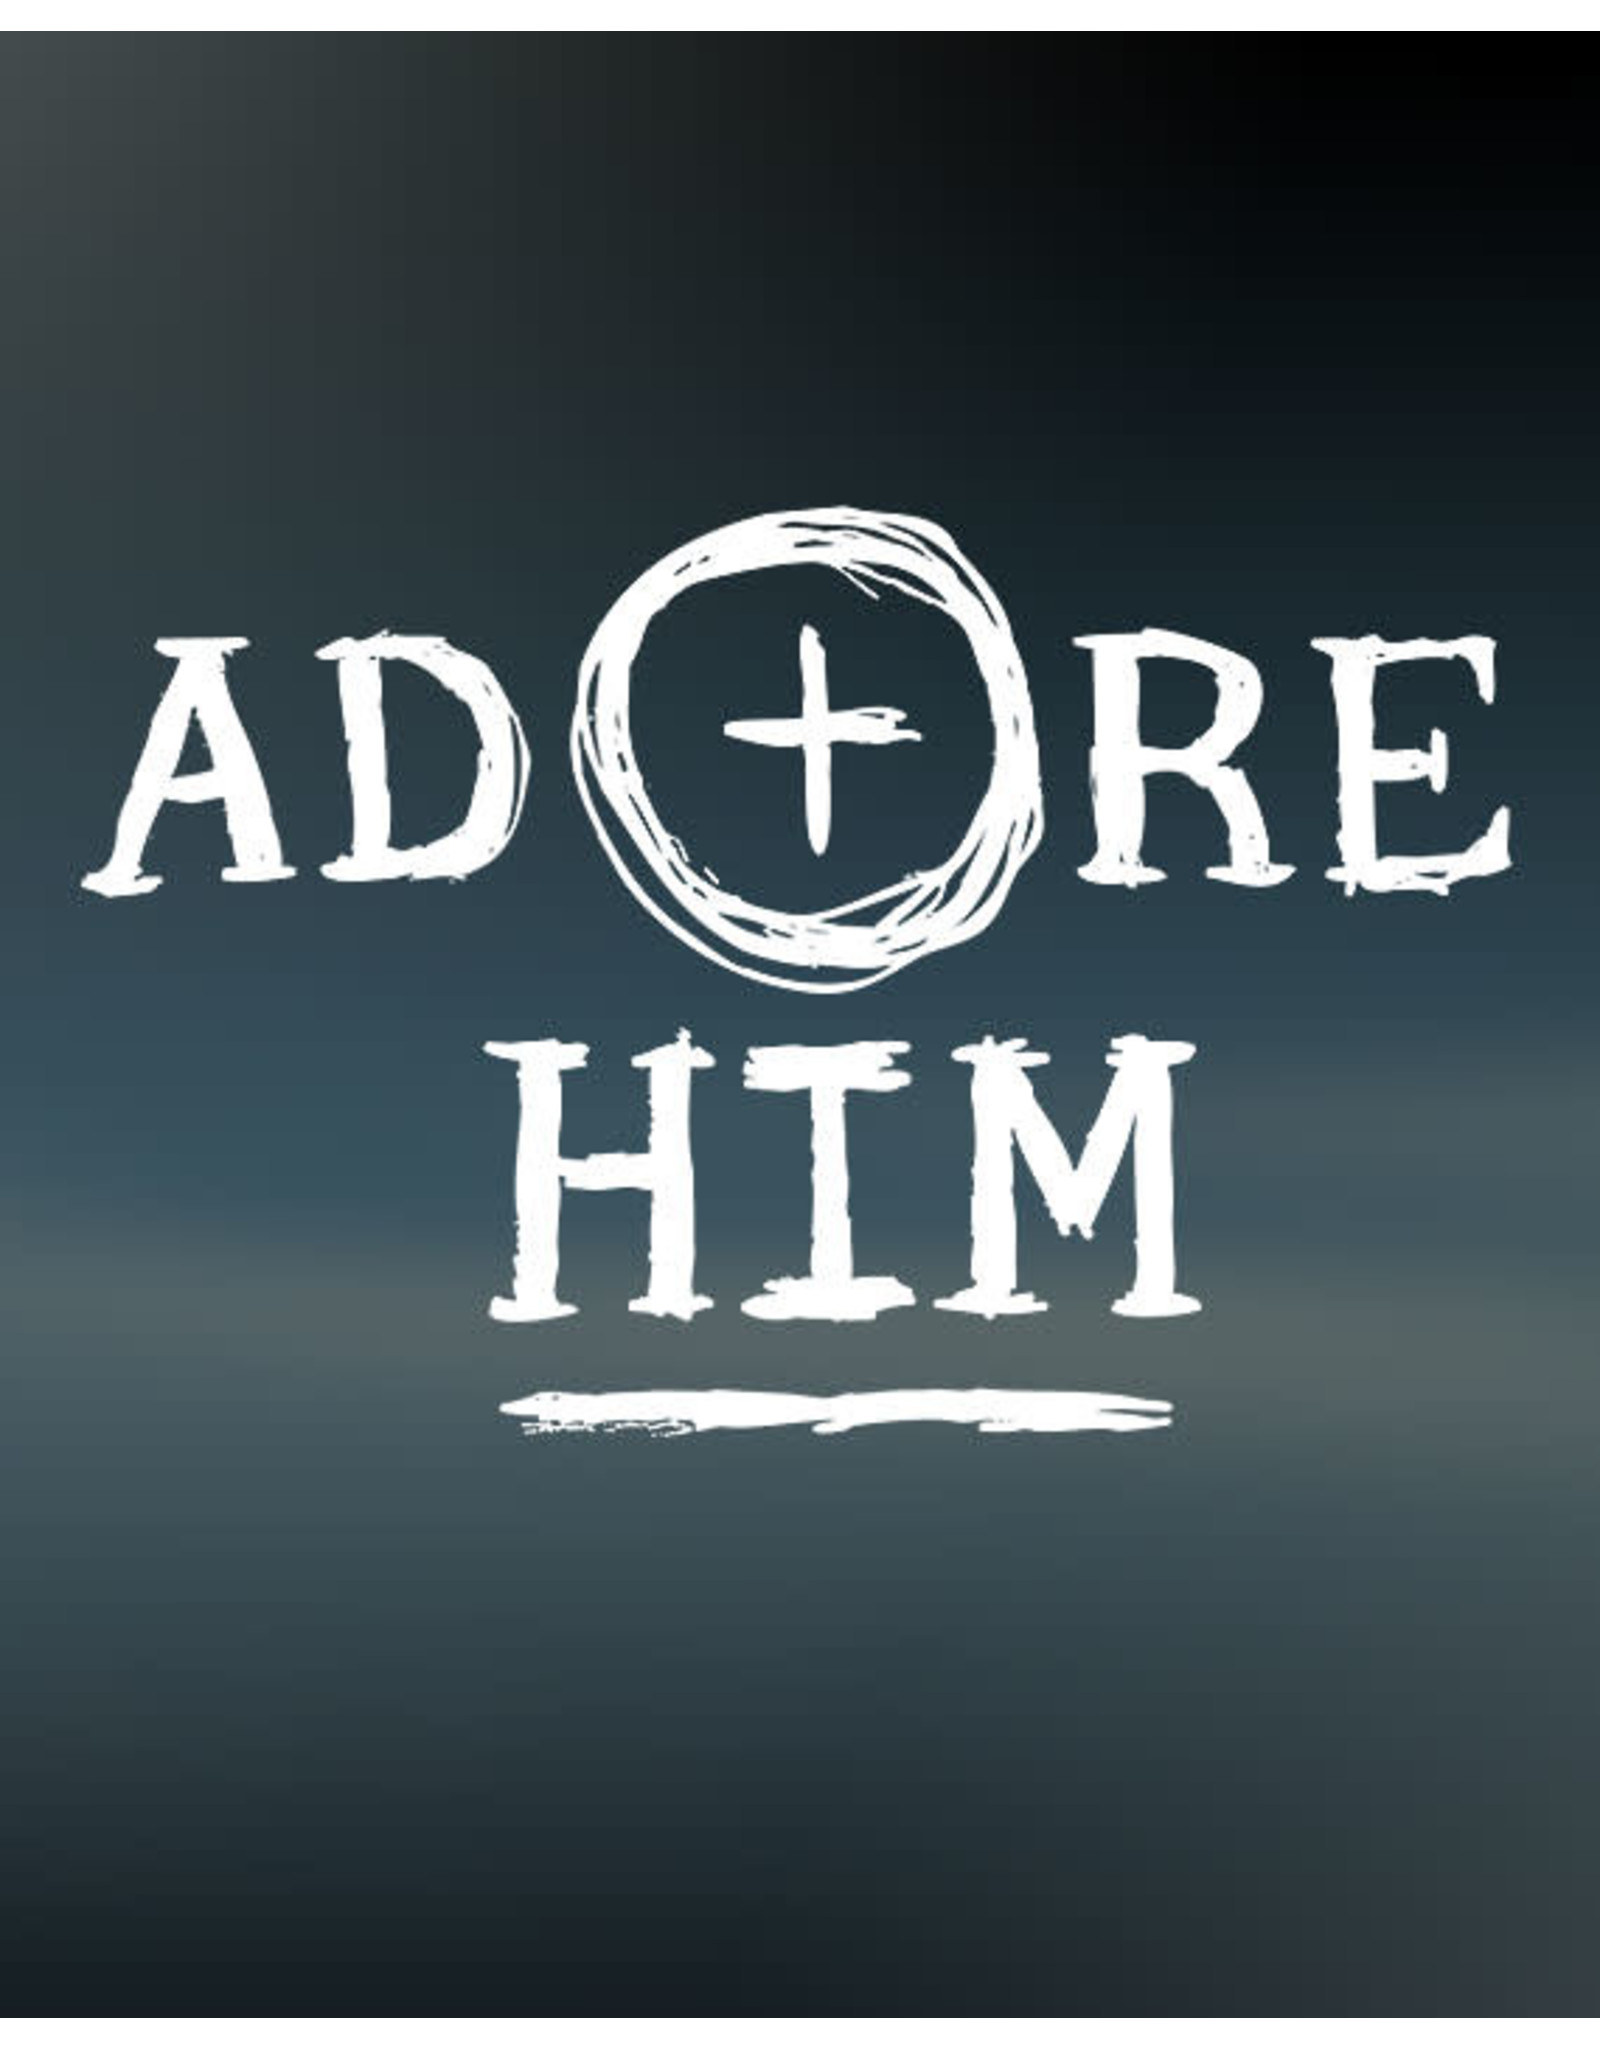 Decal - Adore Him